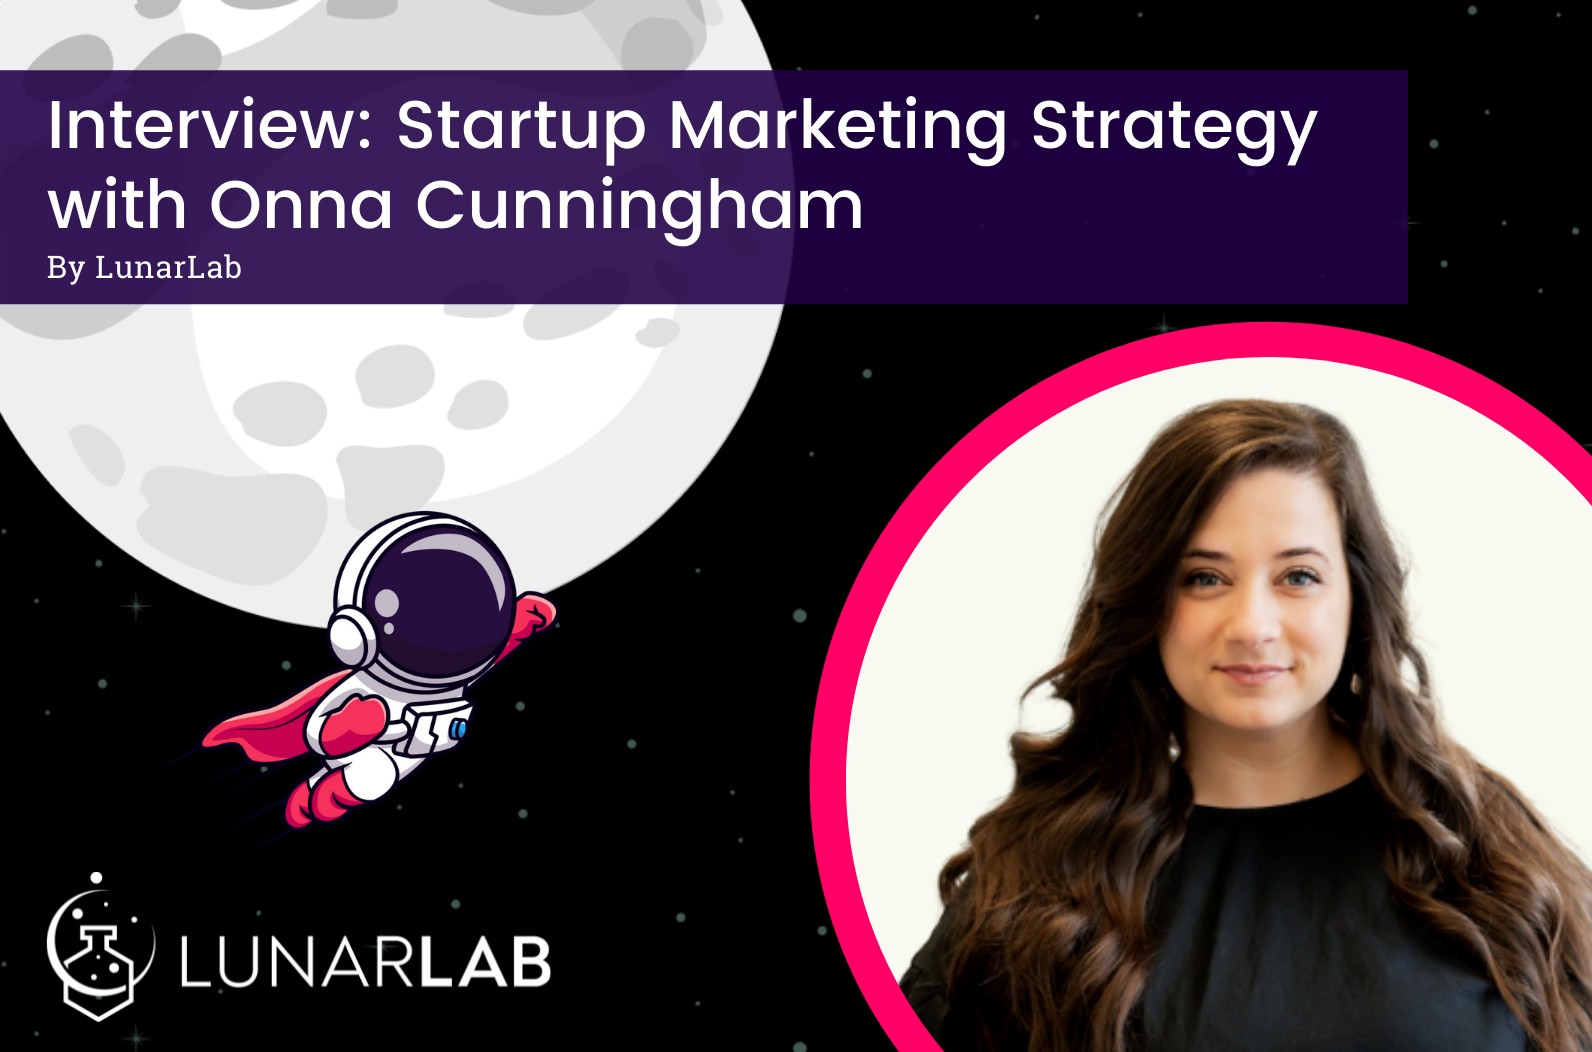 Image of marketing expert Onna Cunningham on a black background, with a moon and an astronaut. Text reads: "Interview: Startup Marketing Strategy with Onna Cunningham"